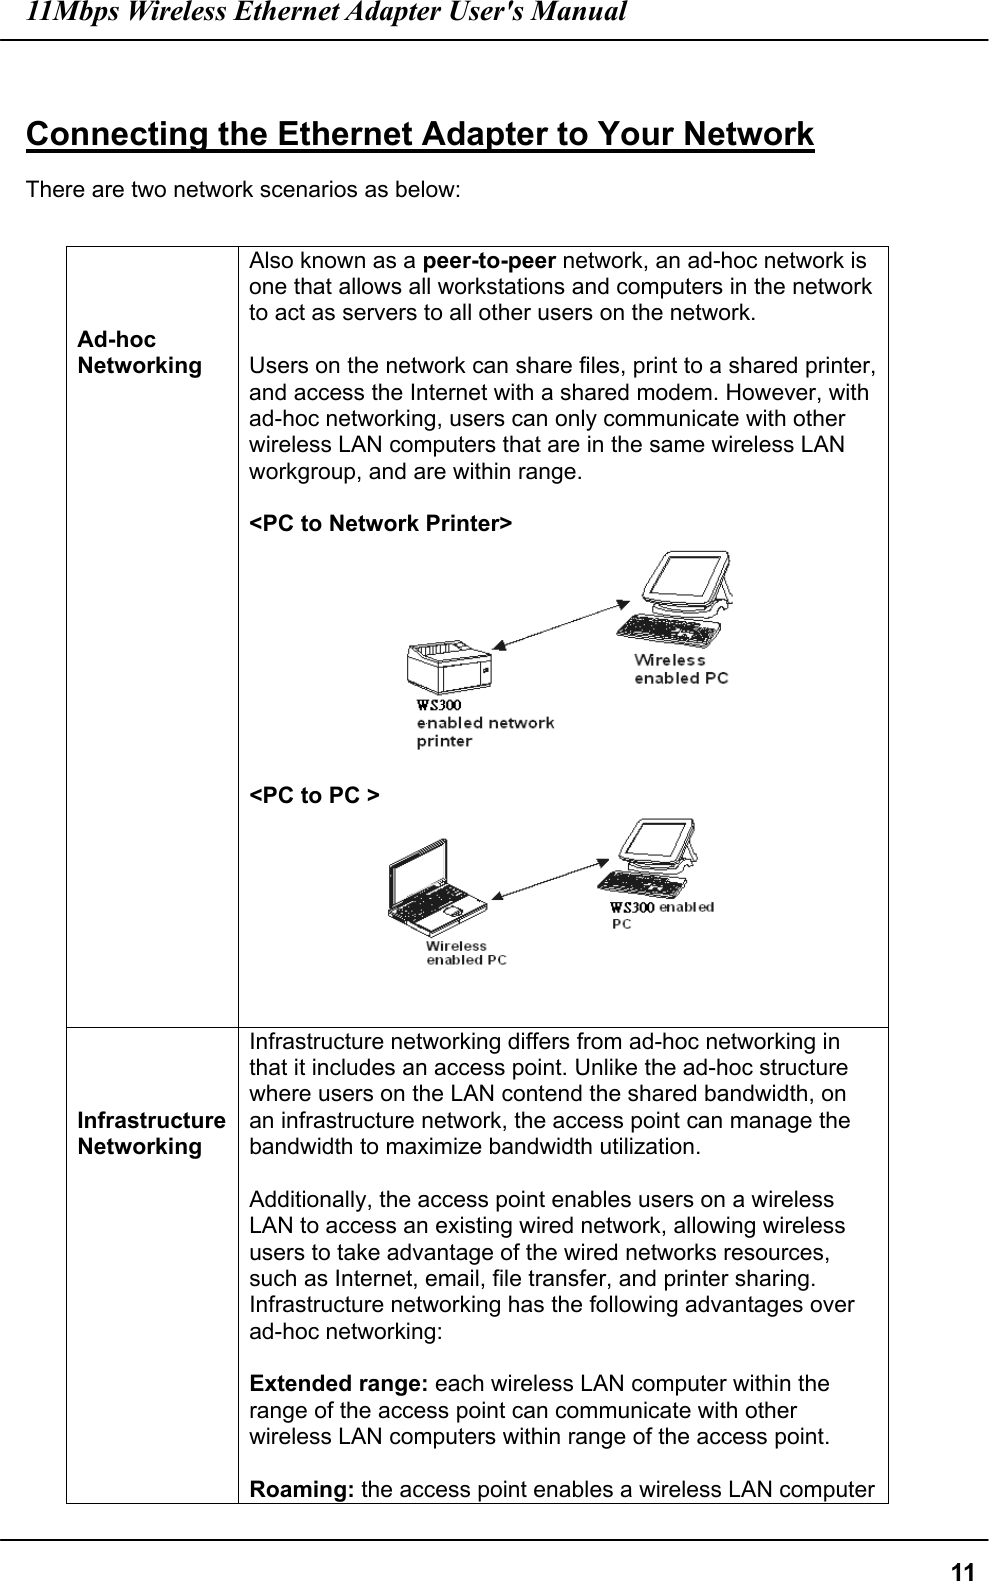 11Mbps Wireless Ethernet Adapter User&apos;s Manual  11 Connecting the Ethernet Adapter to Your Network There are two network scenarios as below:       Ad-hoc  Networking Also known as a peer-to-peer network, an ad-hoc network is one that allows all workstations and computers in the network to act as servers to all other users on the network.    Users on the network can share files, print to a shared printer, and access the Internet with a shared modem. However, with ad-hoc networking, users can only communicate with other wireless LAN computers that are in the same wireless LAN workgroup, and are within range.  &lt;PC to Network Printer&gt;   &lt;PC to PC &gt;     Infrastructure Networking Infrastructure networking differs from ad-hoc networking in that it includes an access point. Unlike the ad-hoc structure where users on the LAN contend the shared bandwidth, on an infrastructure network, the access point can manage the bandwidth to maximize bandwidth utilization.   Additionally, the access point enables users on a wireless LAN to access an existing wired network, allowing wireless users to take advantage of the wired networks resources, such as Internet, email, file transfer, and printer sharing.   Infrastructure networking has the following advantages over ad-hoc networking:  Extended range: each wireless LAN computer within the range of the access point can communicate with other wireless LAN computers within range of the access point.  Roaming: the access point enables a wireless LAN computer 